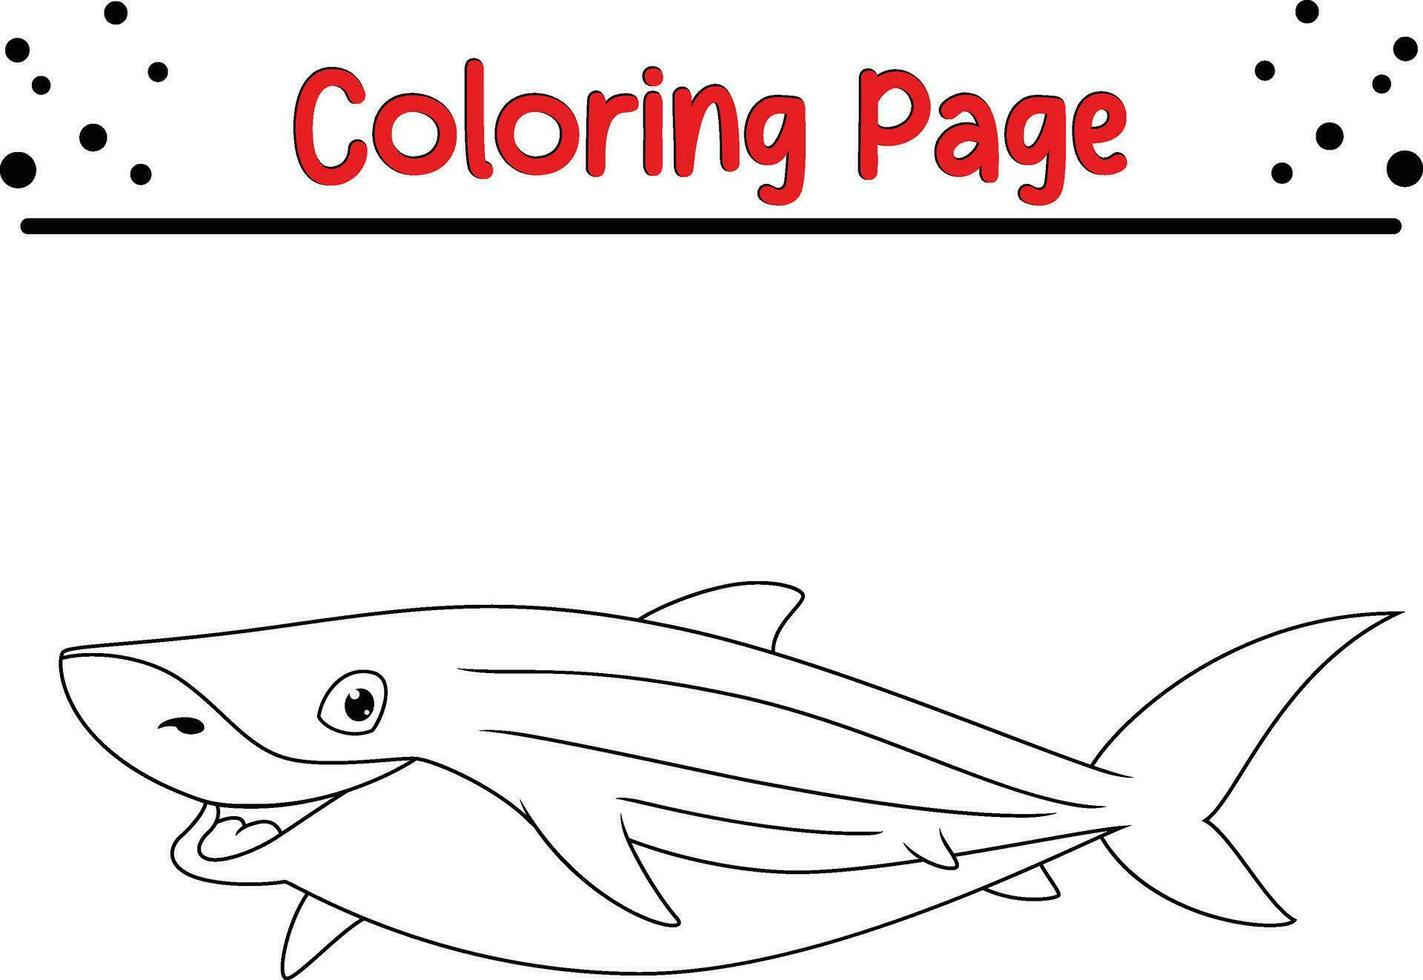 Shark Coloring Page for children. Black and white vector illustration for coloring book